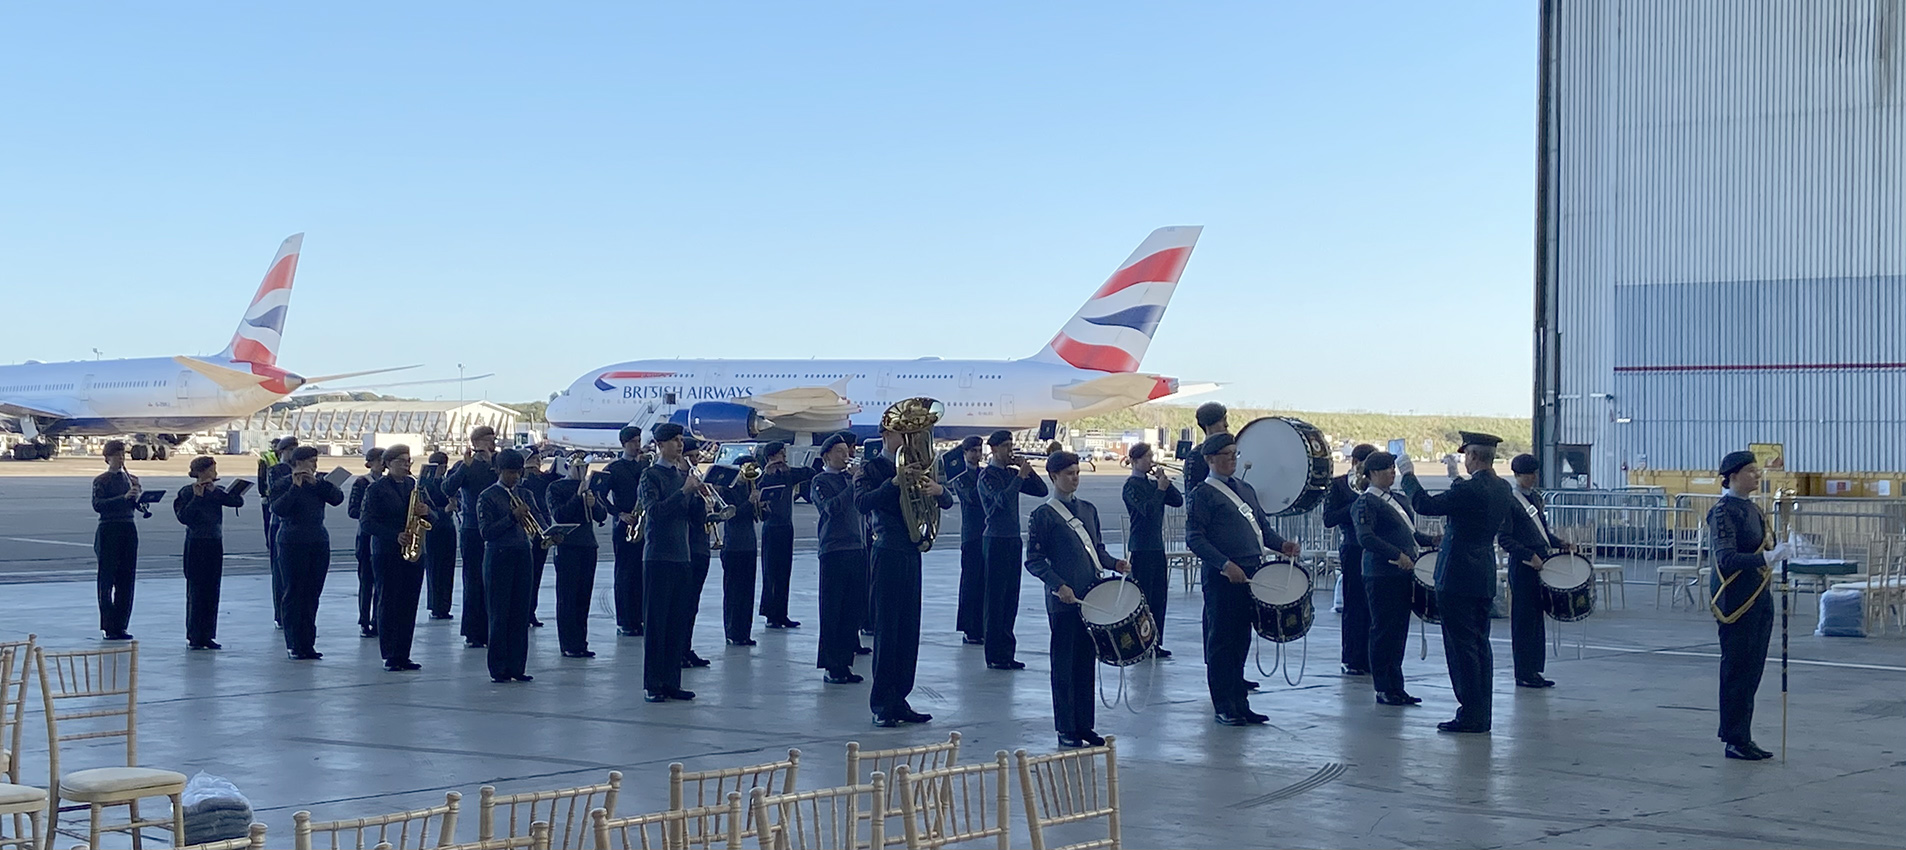 RAF Air Cadet band in front of British Airways aircraft